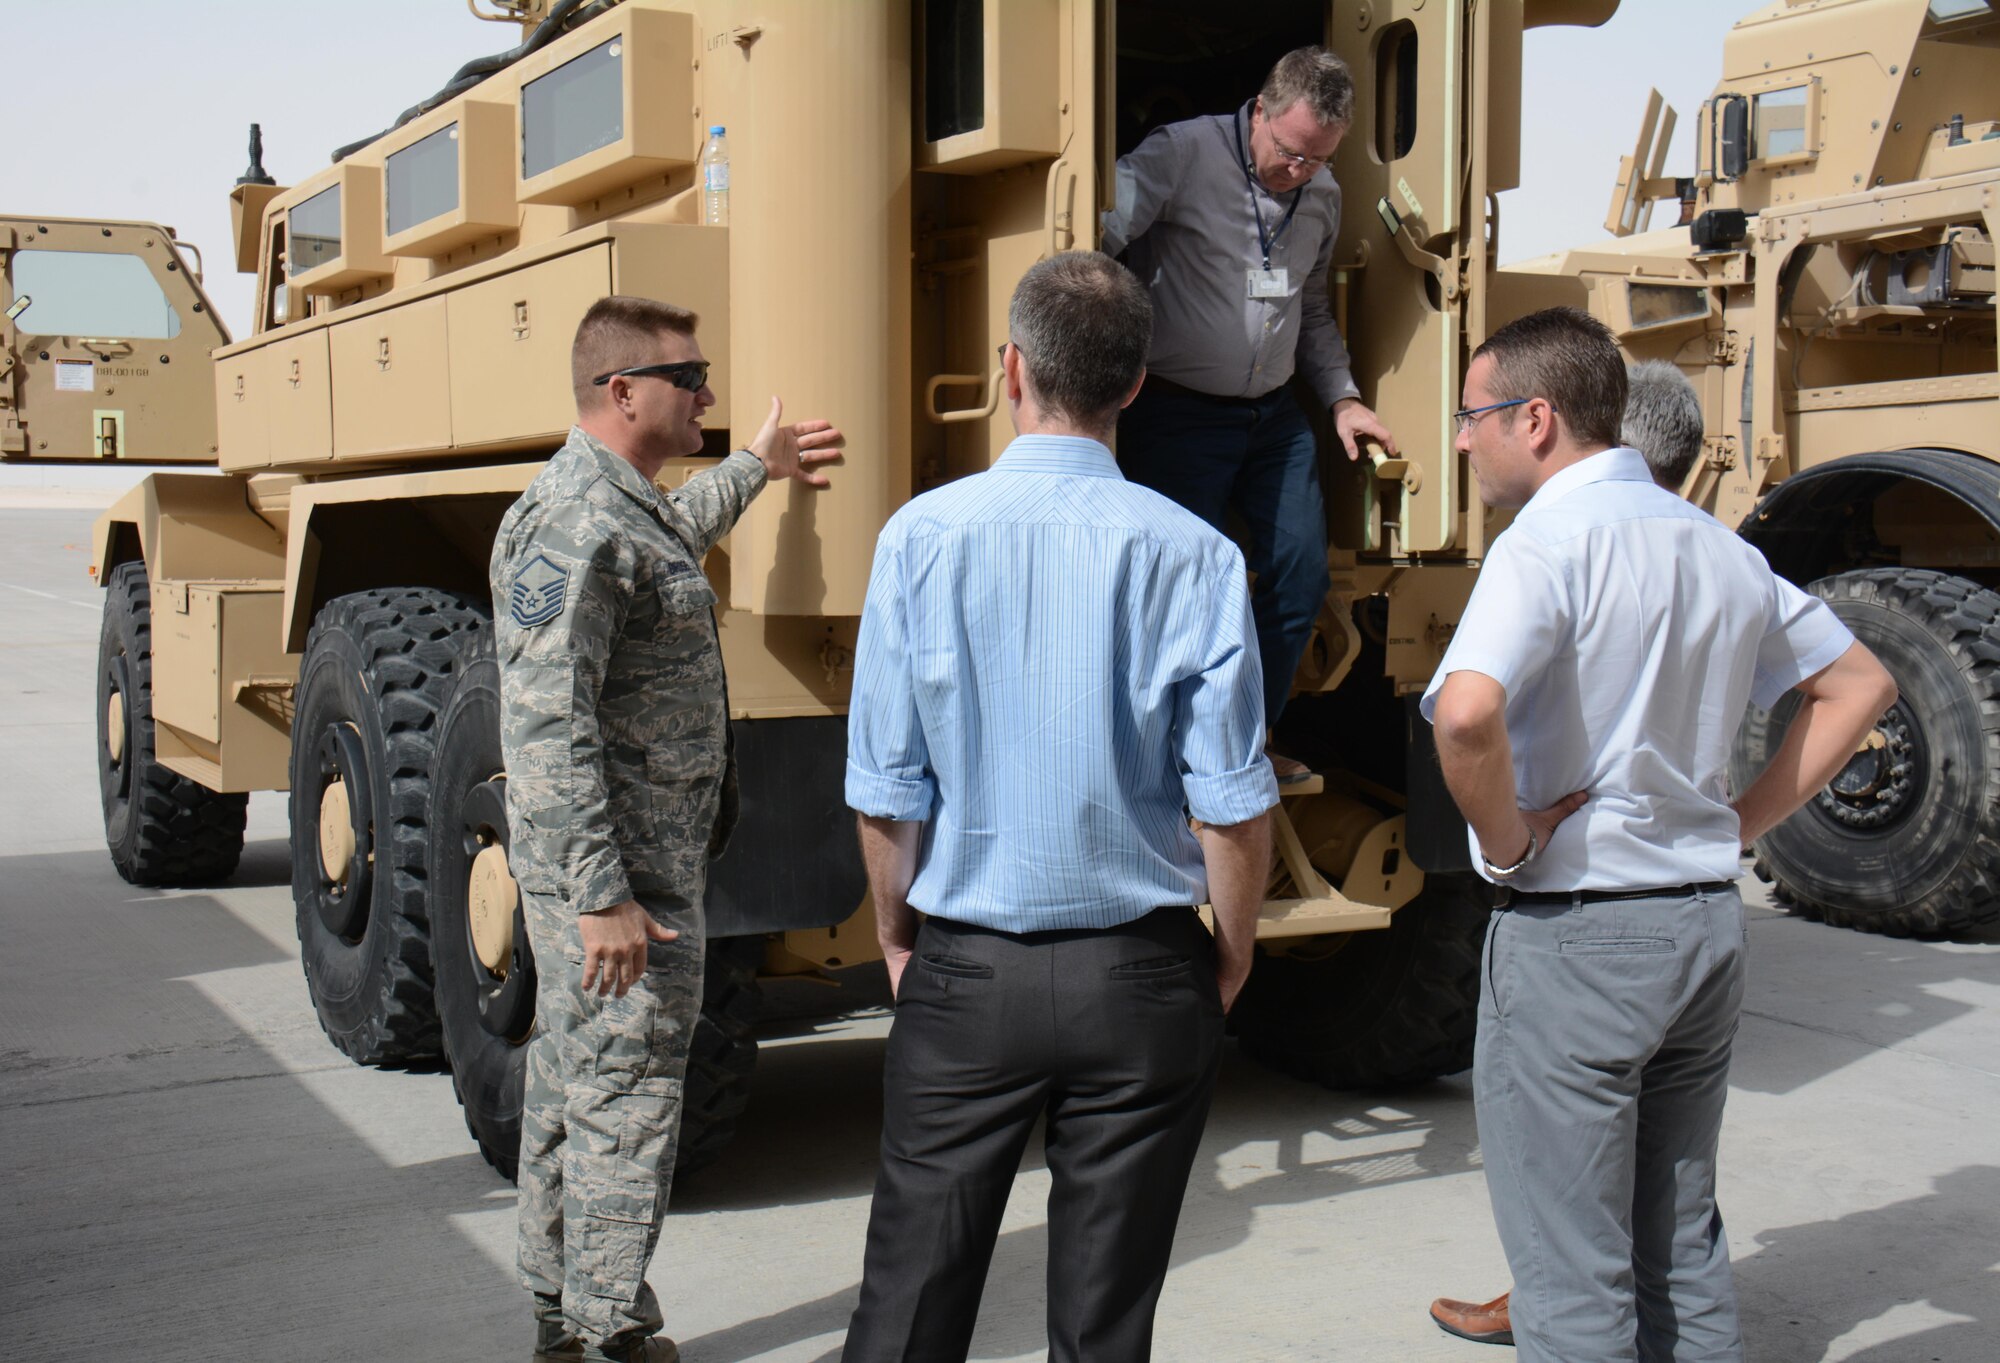 Master Sgt. Sean Birdsell, U.S. Air Force’s Central Detachment 6, shows Flight Line Fest attendees a mine resistant ambush protectant vehicle at Al Udeid Air Base, Qatar, Jan. 10. Birdsell explained that MRAPs are used to protect U.S. service members from attack and have been employed in Iraq and Afghanistan. The vehicle joined several other emergency vehicles and nine aircraft in the annual event, a joint partnership between the 379th Air Expeditionary Wing and Qatar Emiri Air Force held to foster relations between Qatar and the United States. (U.S. Air Force photo by Tech. Sgt. James Hodgman/Released)